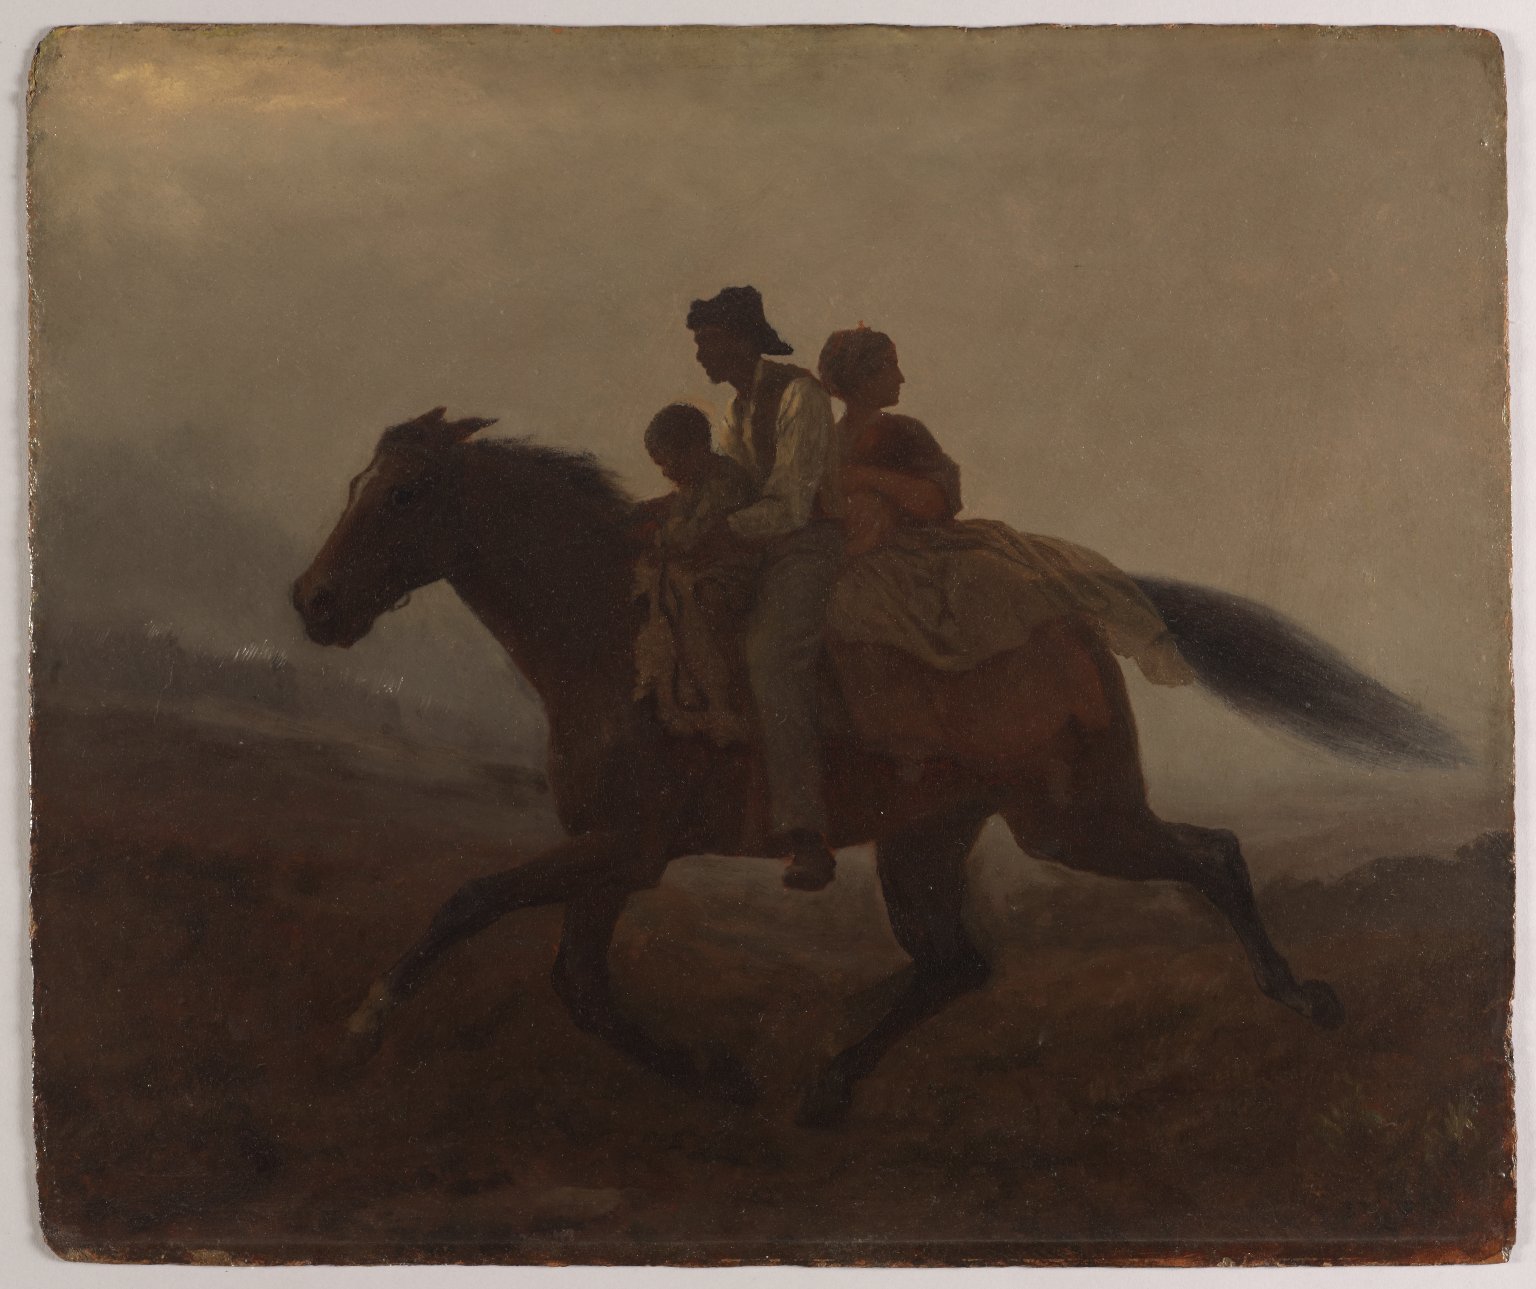 A Ride for Liberty - The Fugitive Slaves, by Eastman Johnson - three people sit atop a brown horse running toward the left of the image, tail streaming out behind. The woman on the back of the horse looks back behind them. The landscape is dusky and brown.